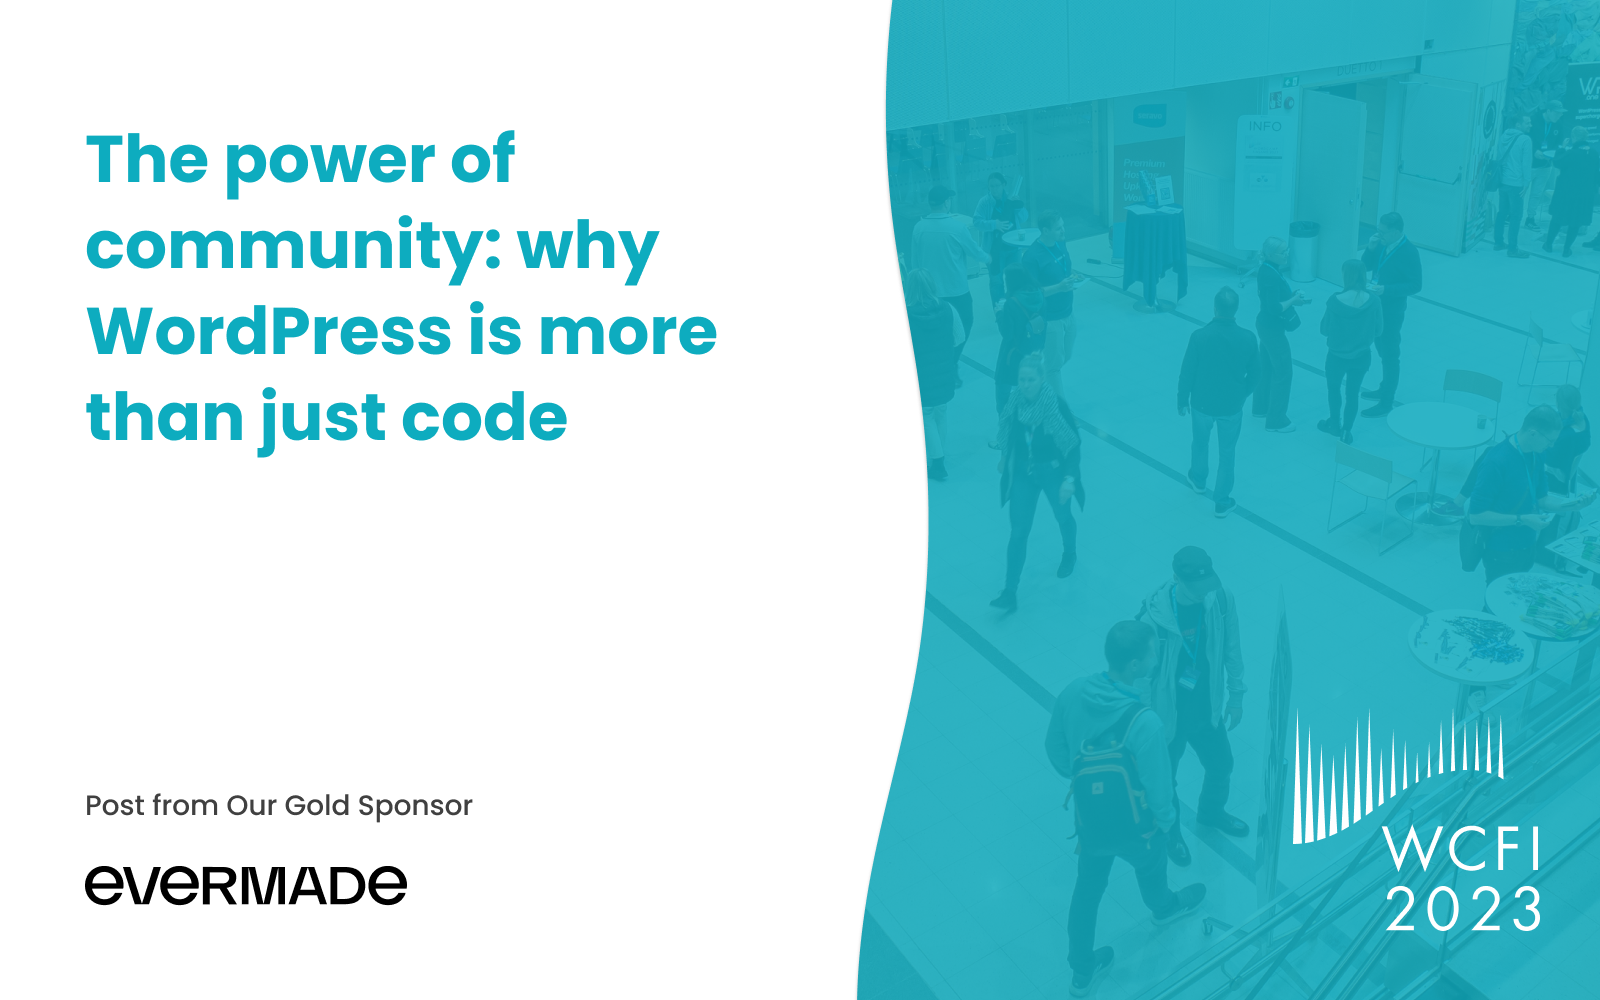 The power of community: why WordPress is more than just code